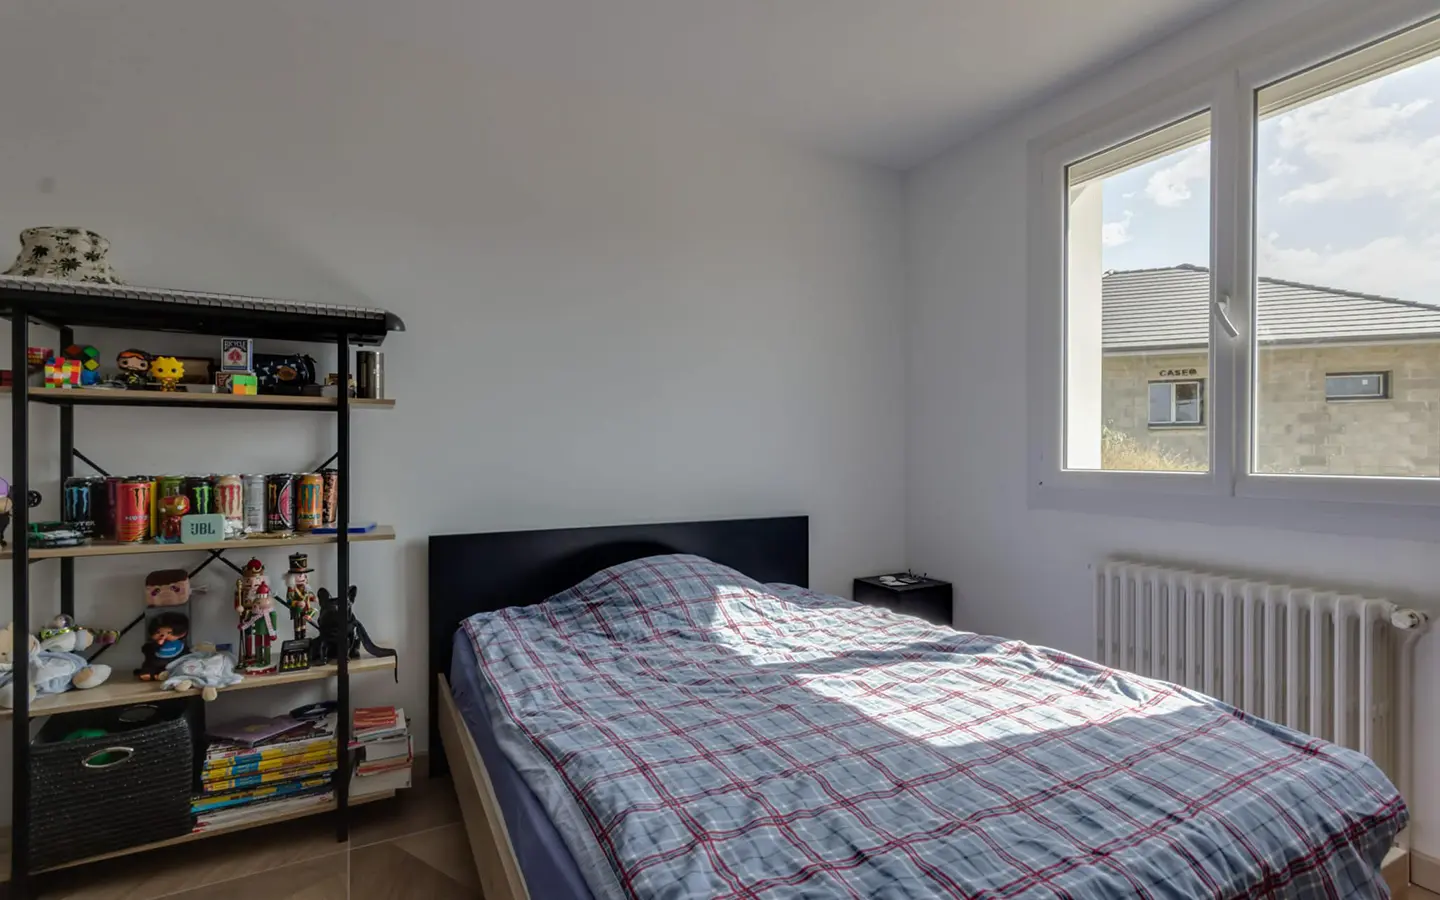 Achat immobilier maison rénovée Annecy Nord chambre